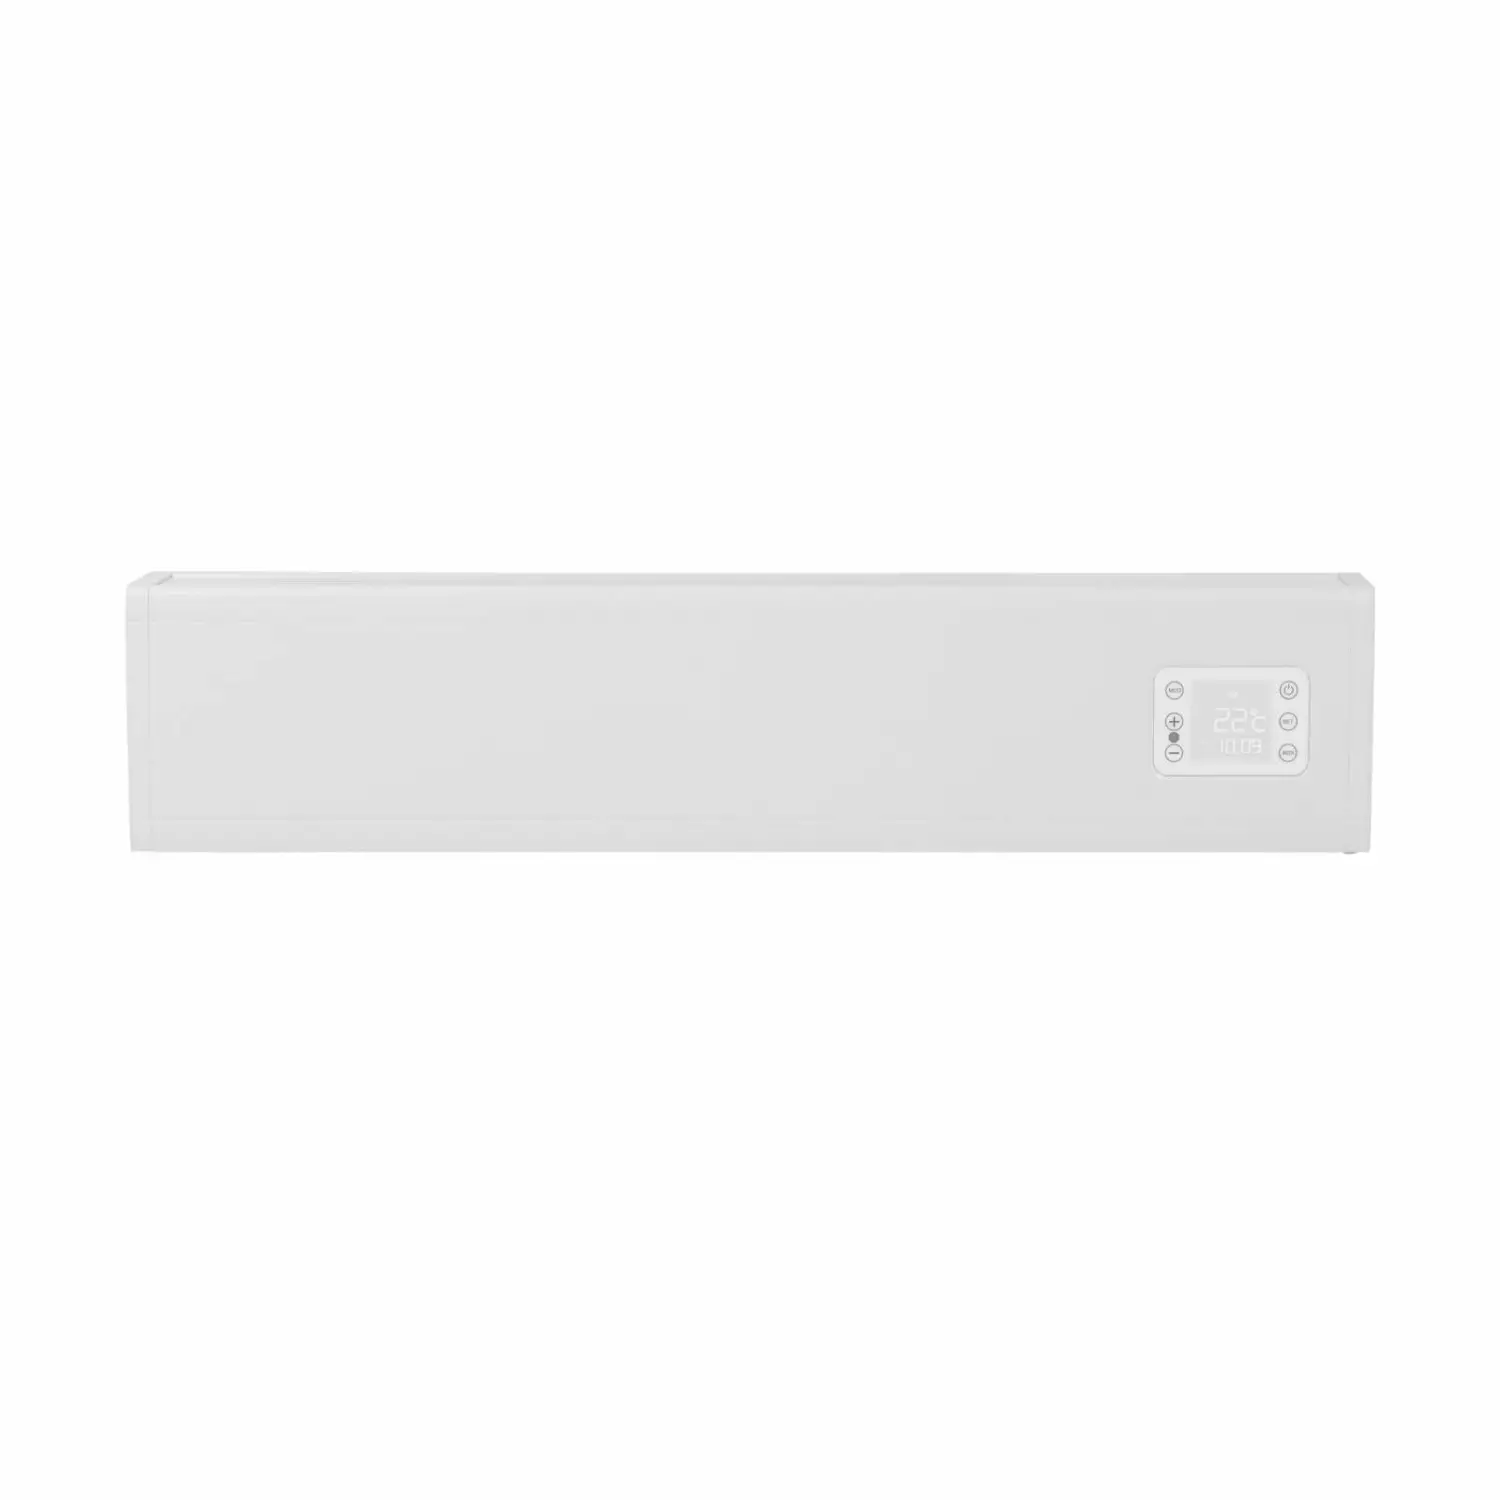 Eurom Alutherm Baseboard 1000 Wi-Fi White Convectorkachel - 1000W - 40m3